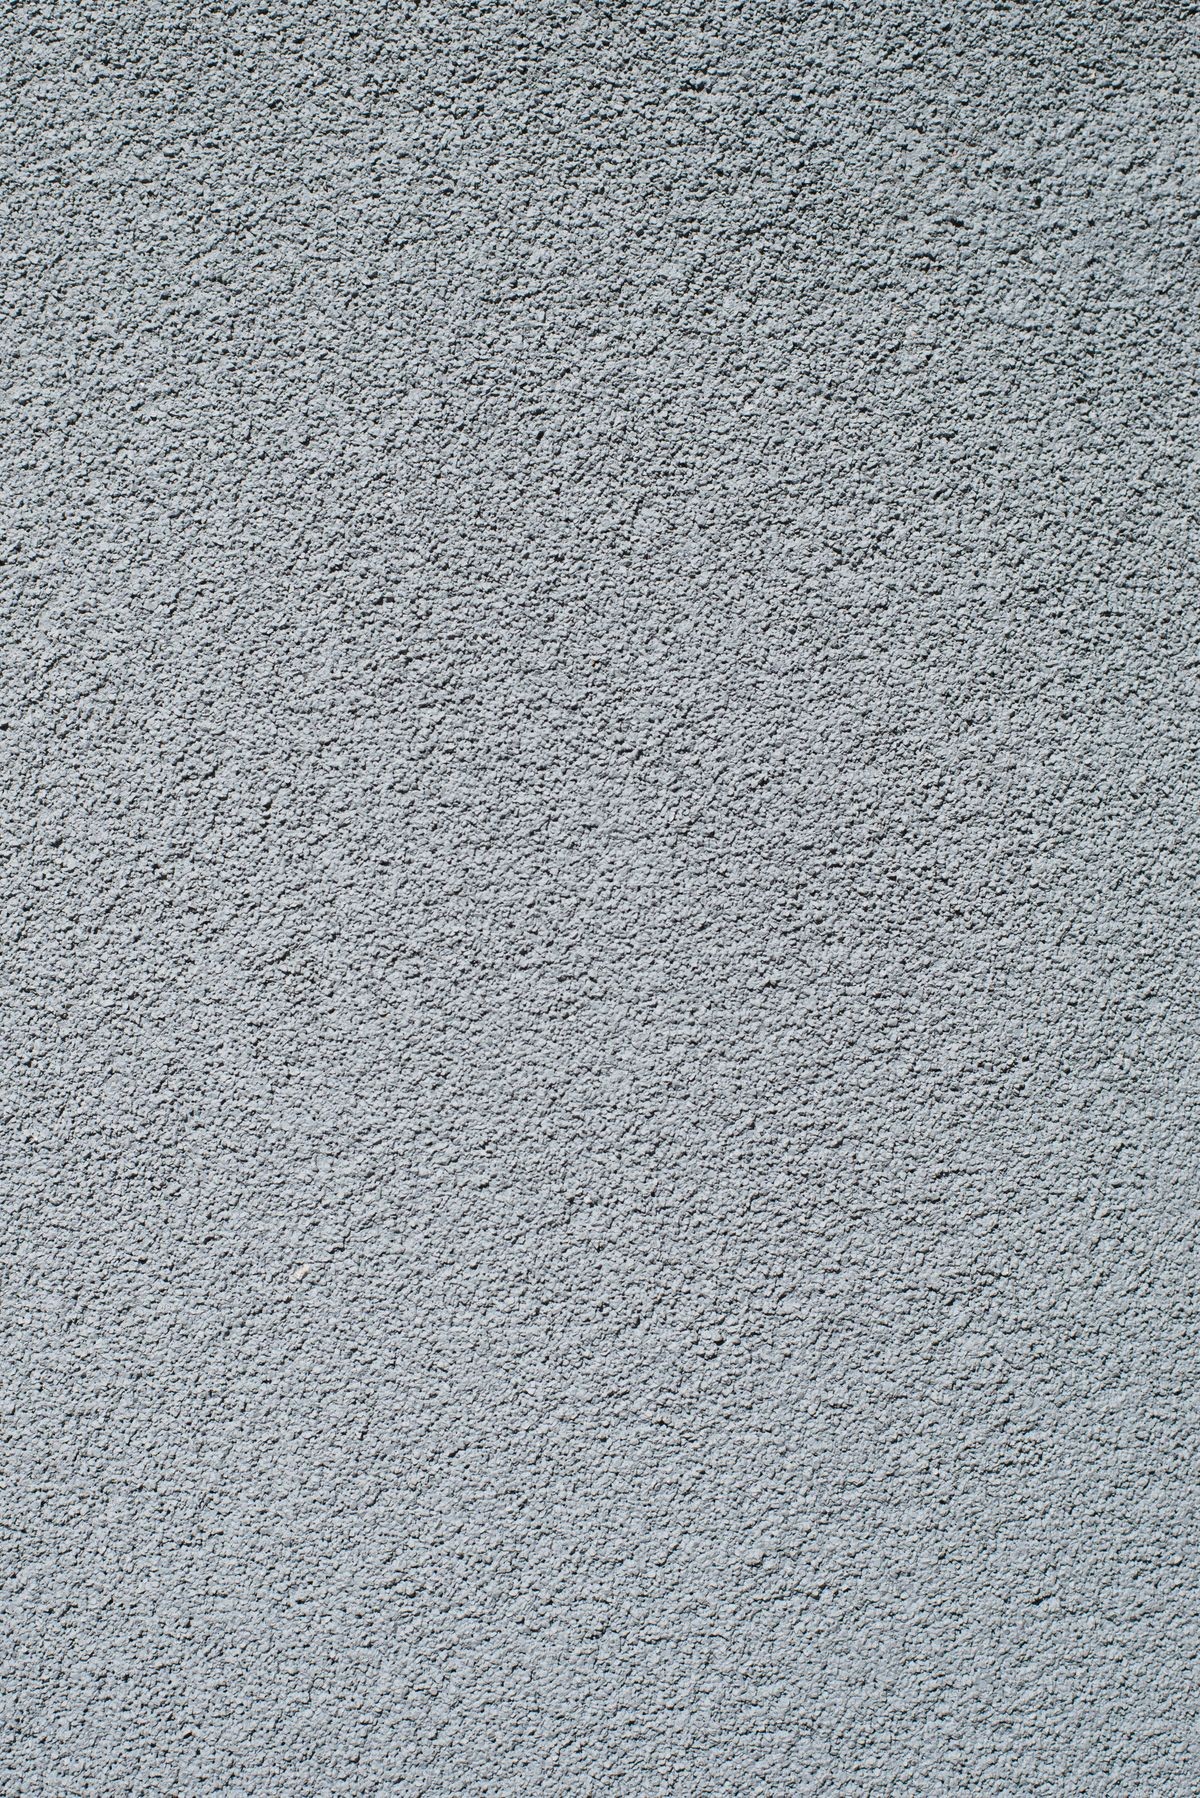 concrete apartment wall texture with grey, rough, popcorn like surface. background, close up, vertical.